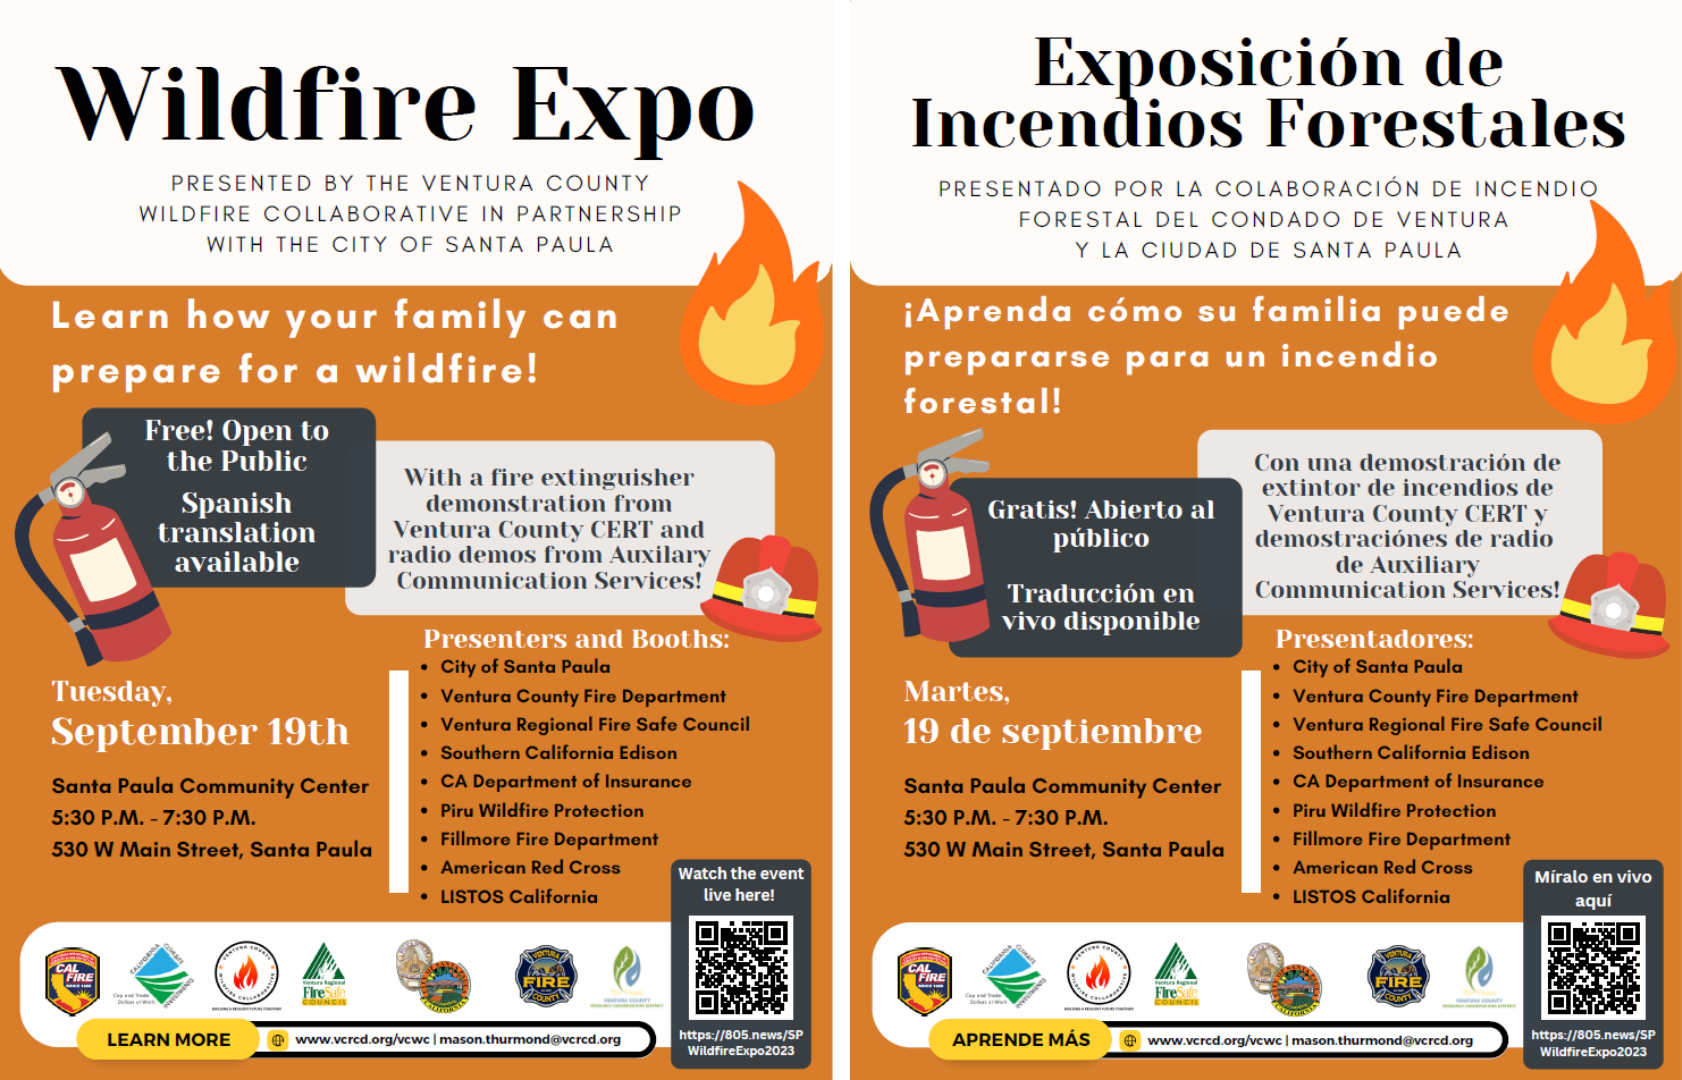 Wildfire Expo on September 19th at 5:30 PM